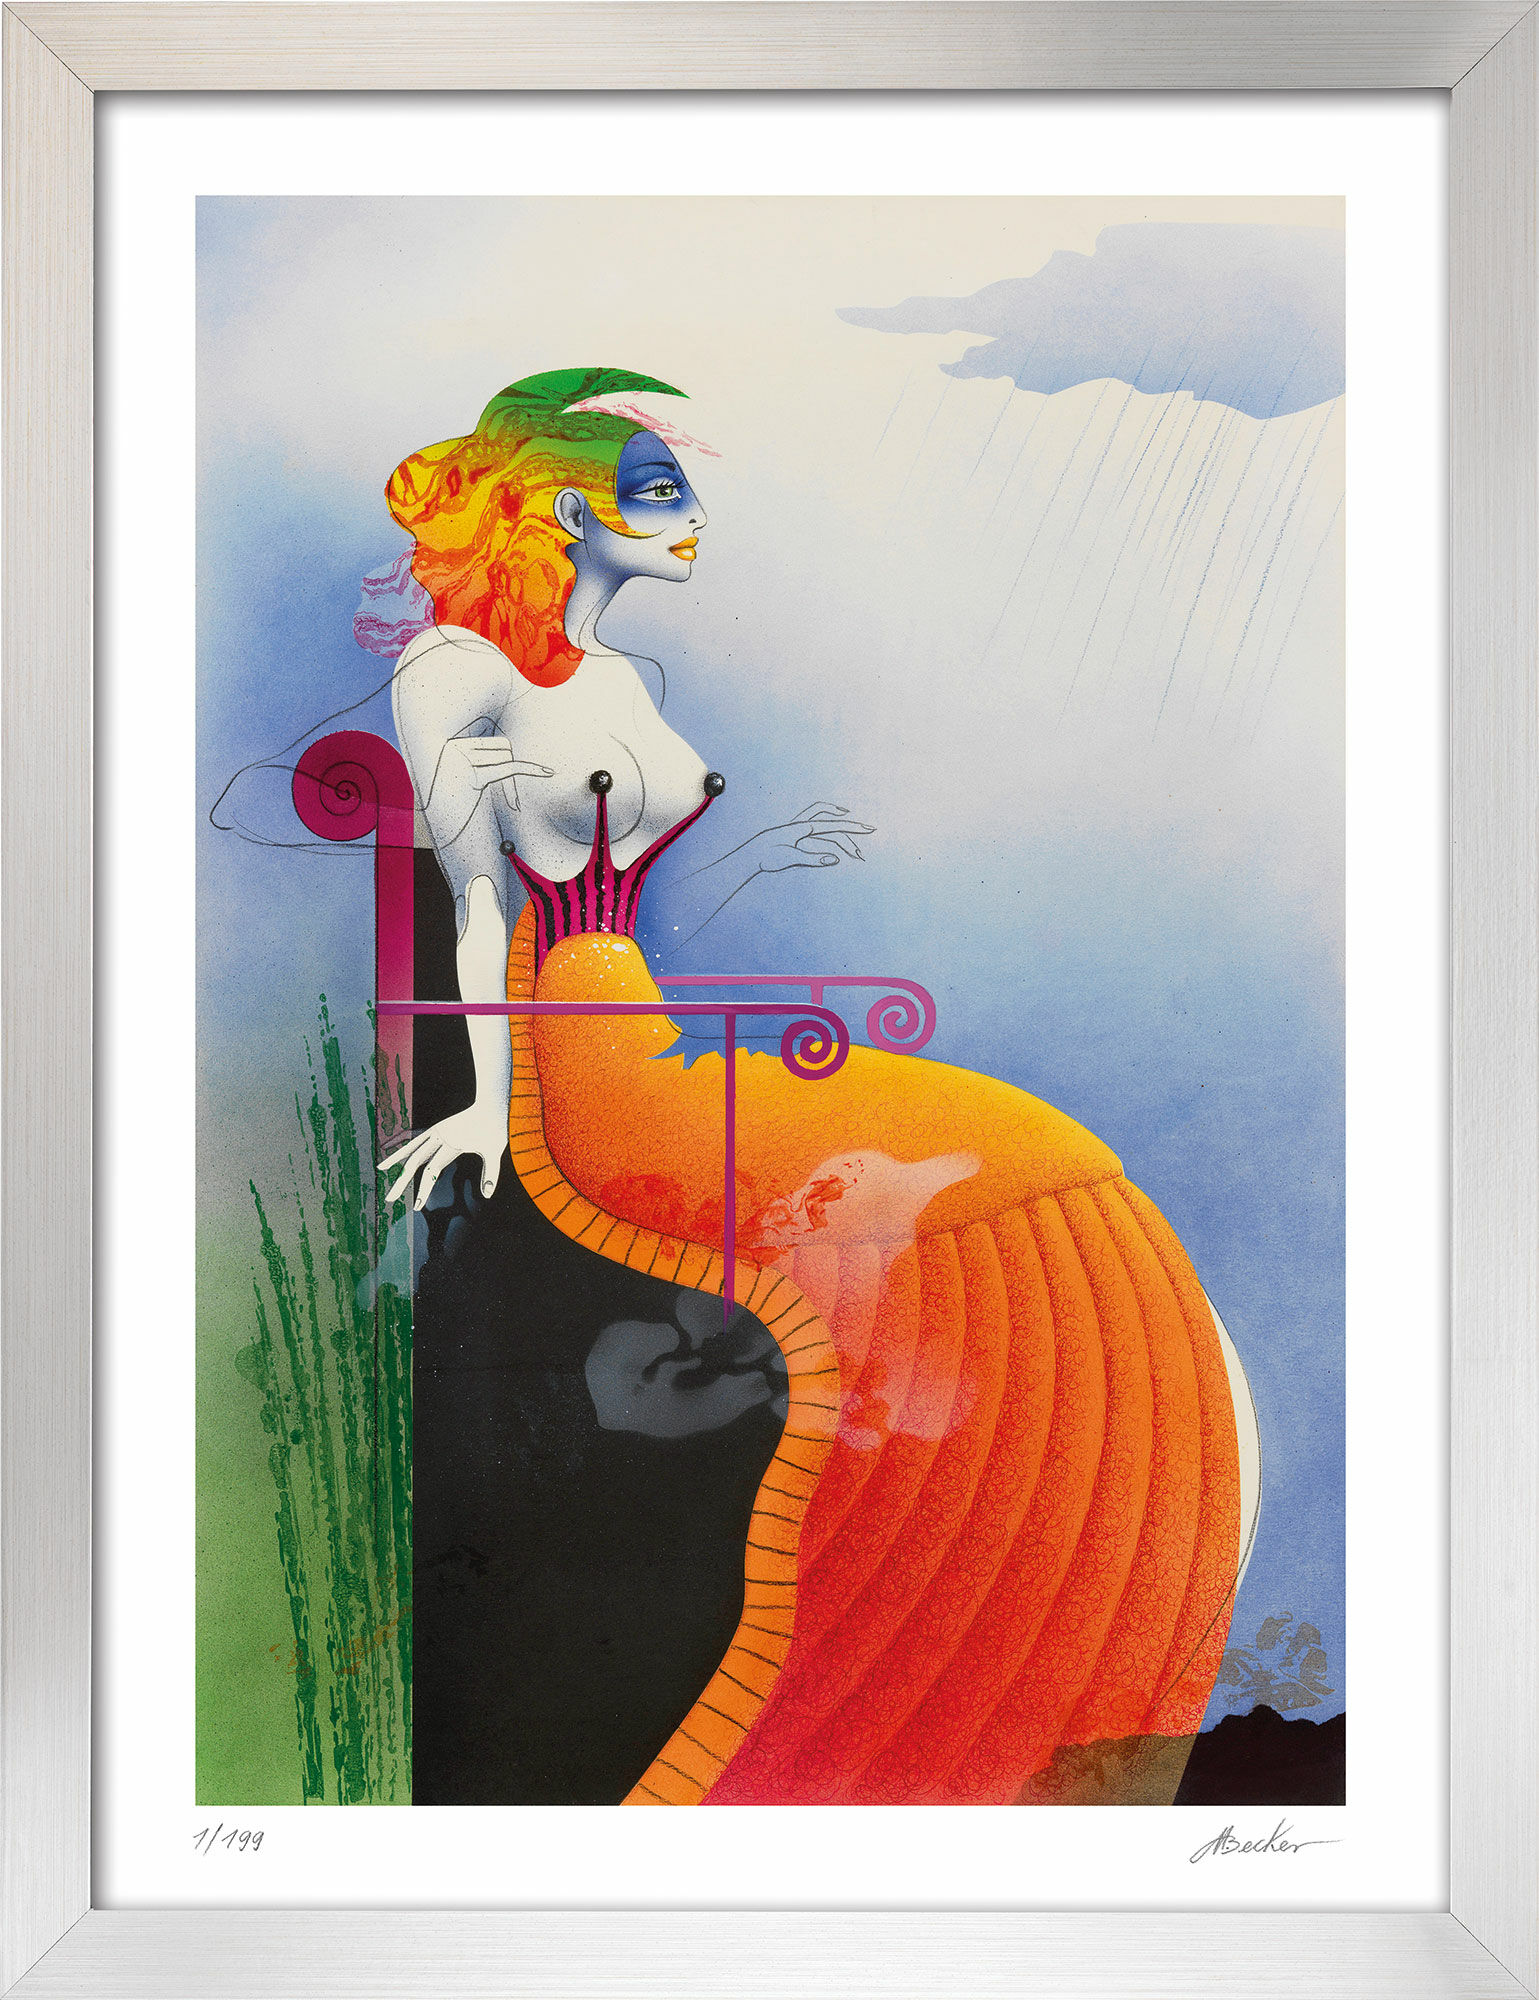 Picture "Woman in Snail Dress", framed by Michael Becker